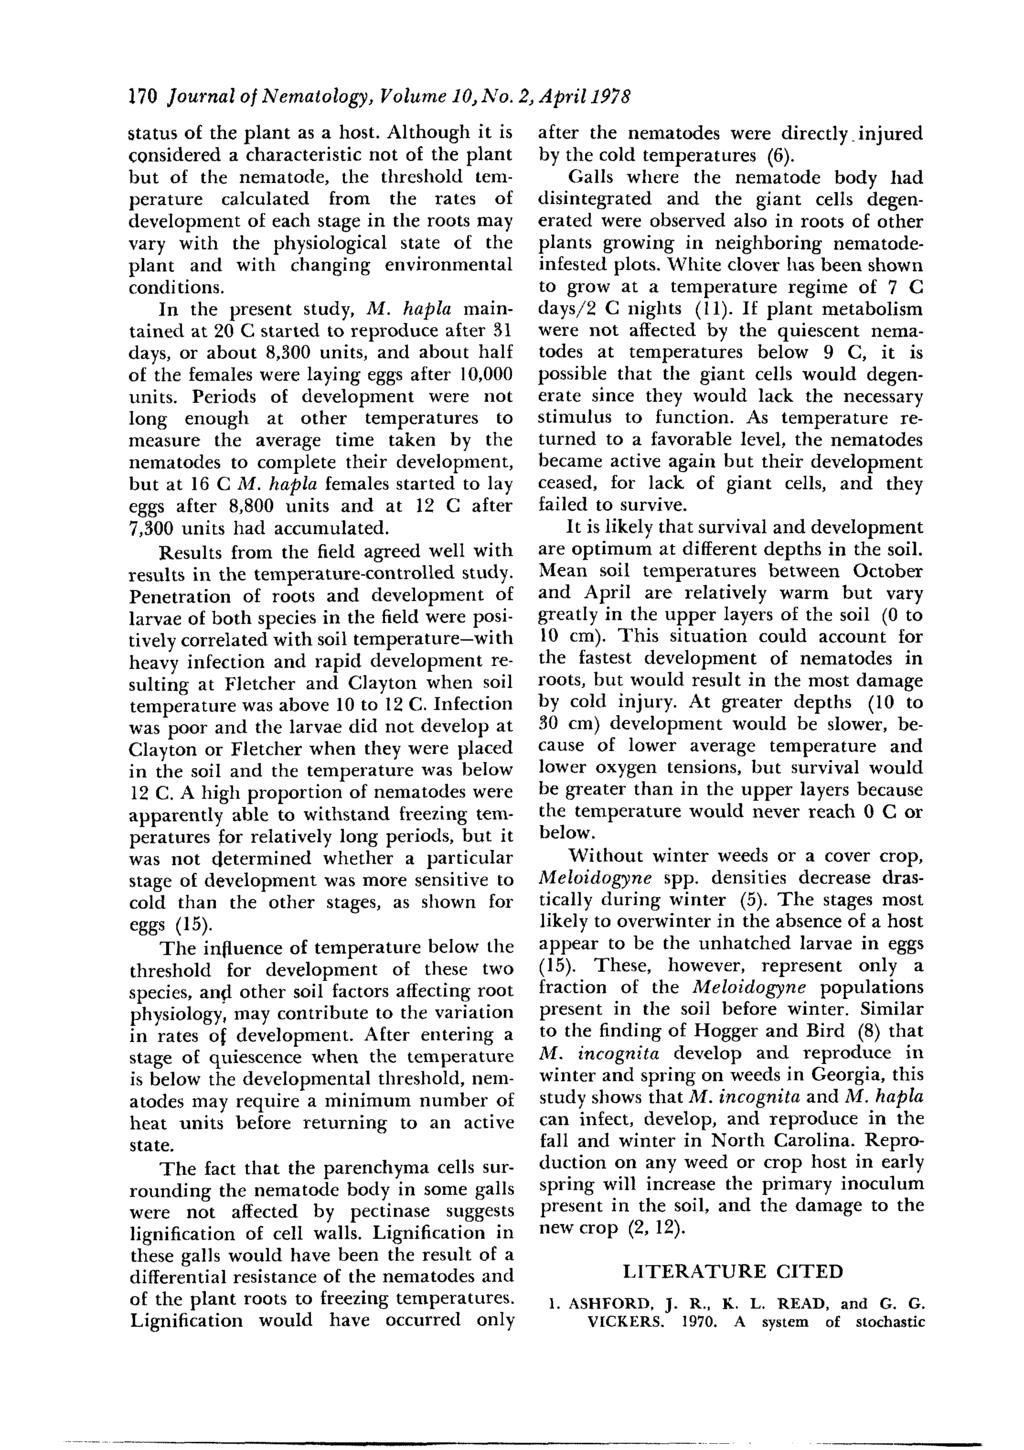 170 Journal o[ Nematology, Volume 10, No. 2, April 1978 status of the plant as a host.